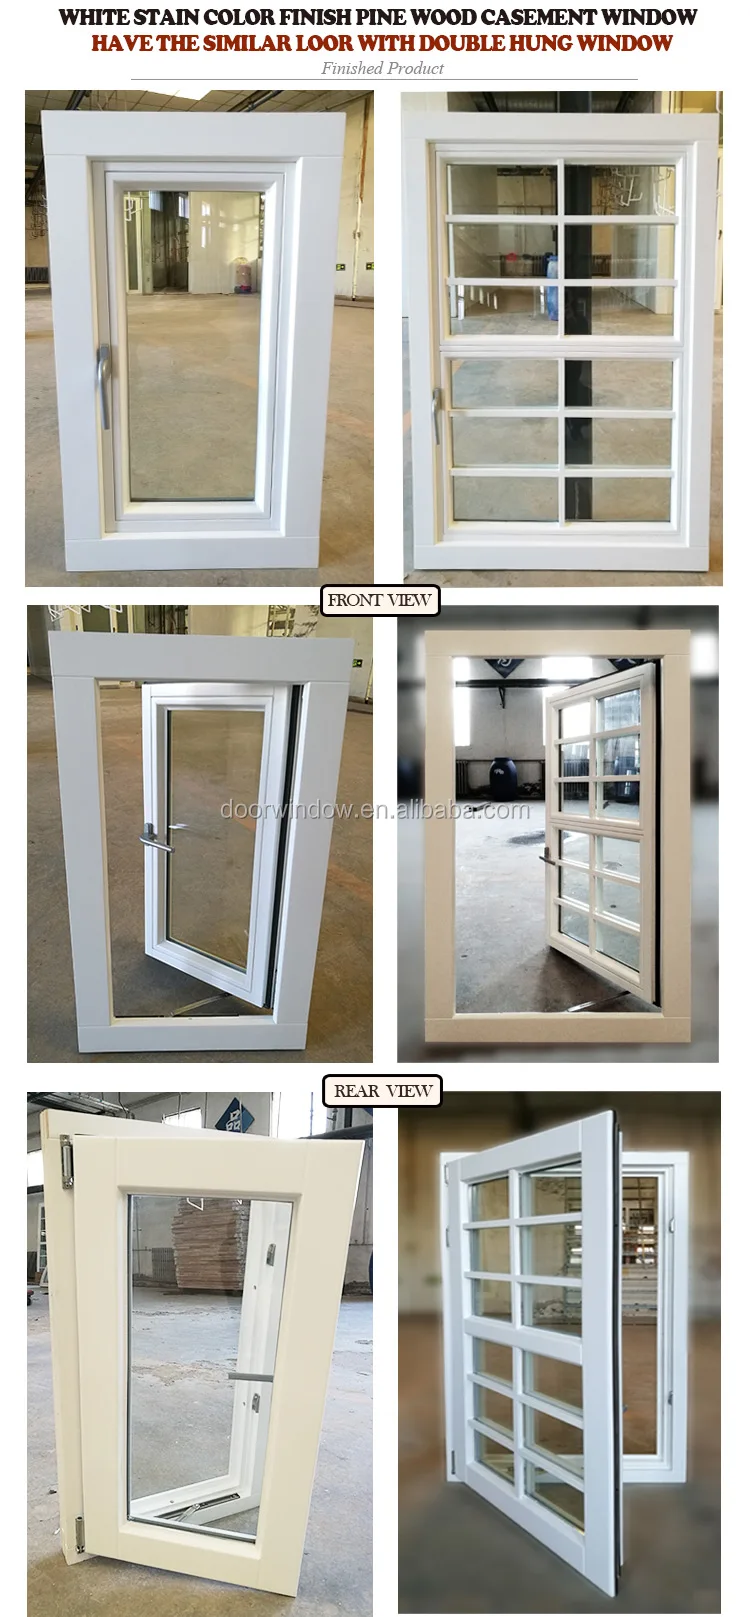 Wholesale select casement window residential windows replacement cost